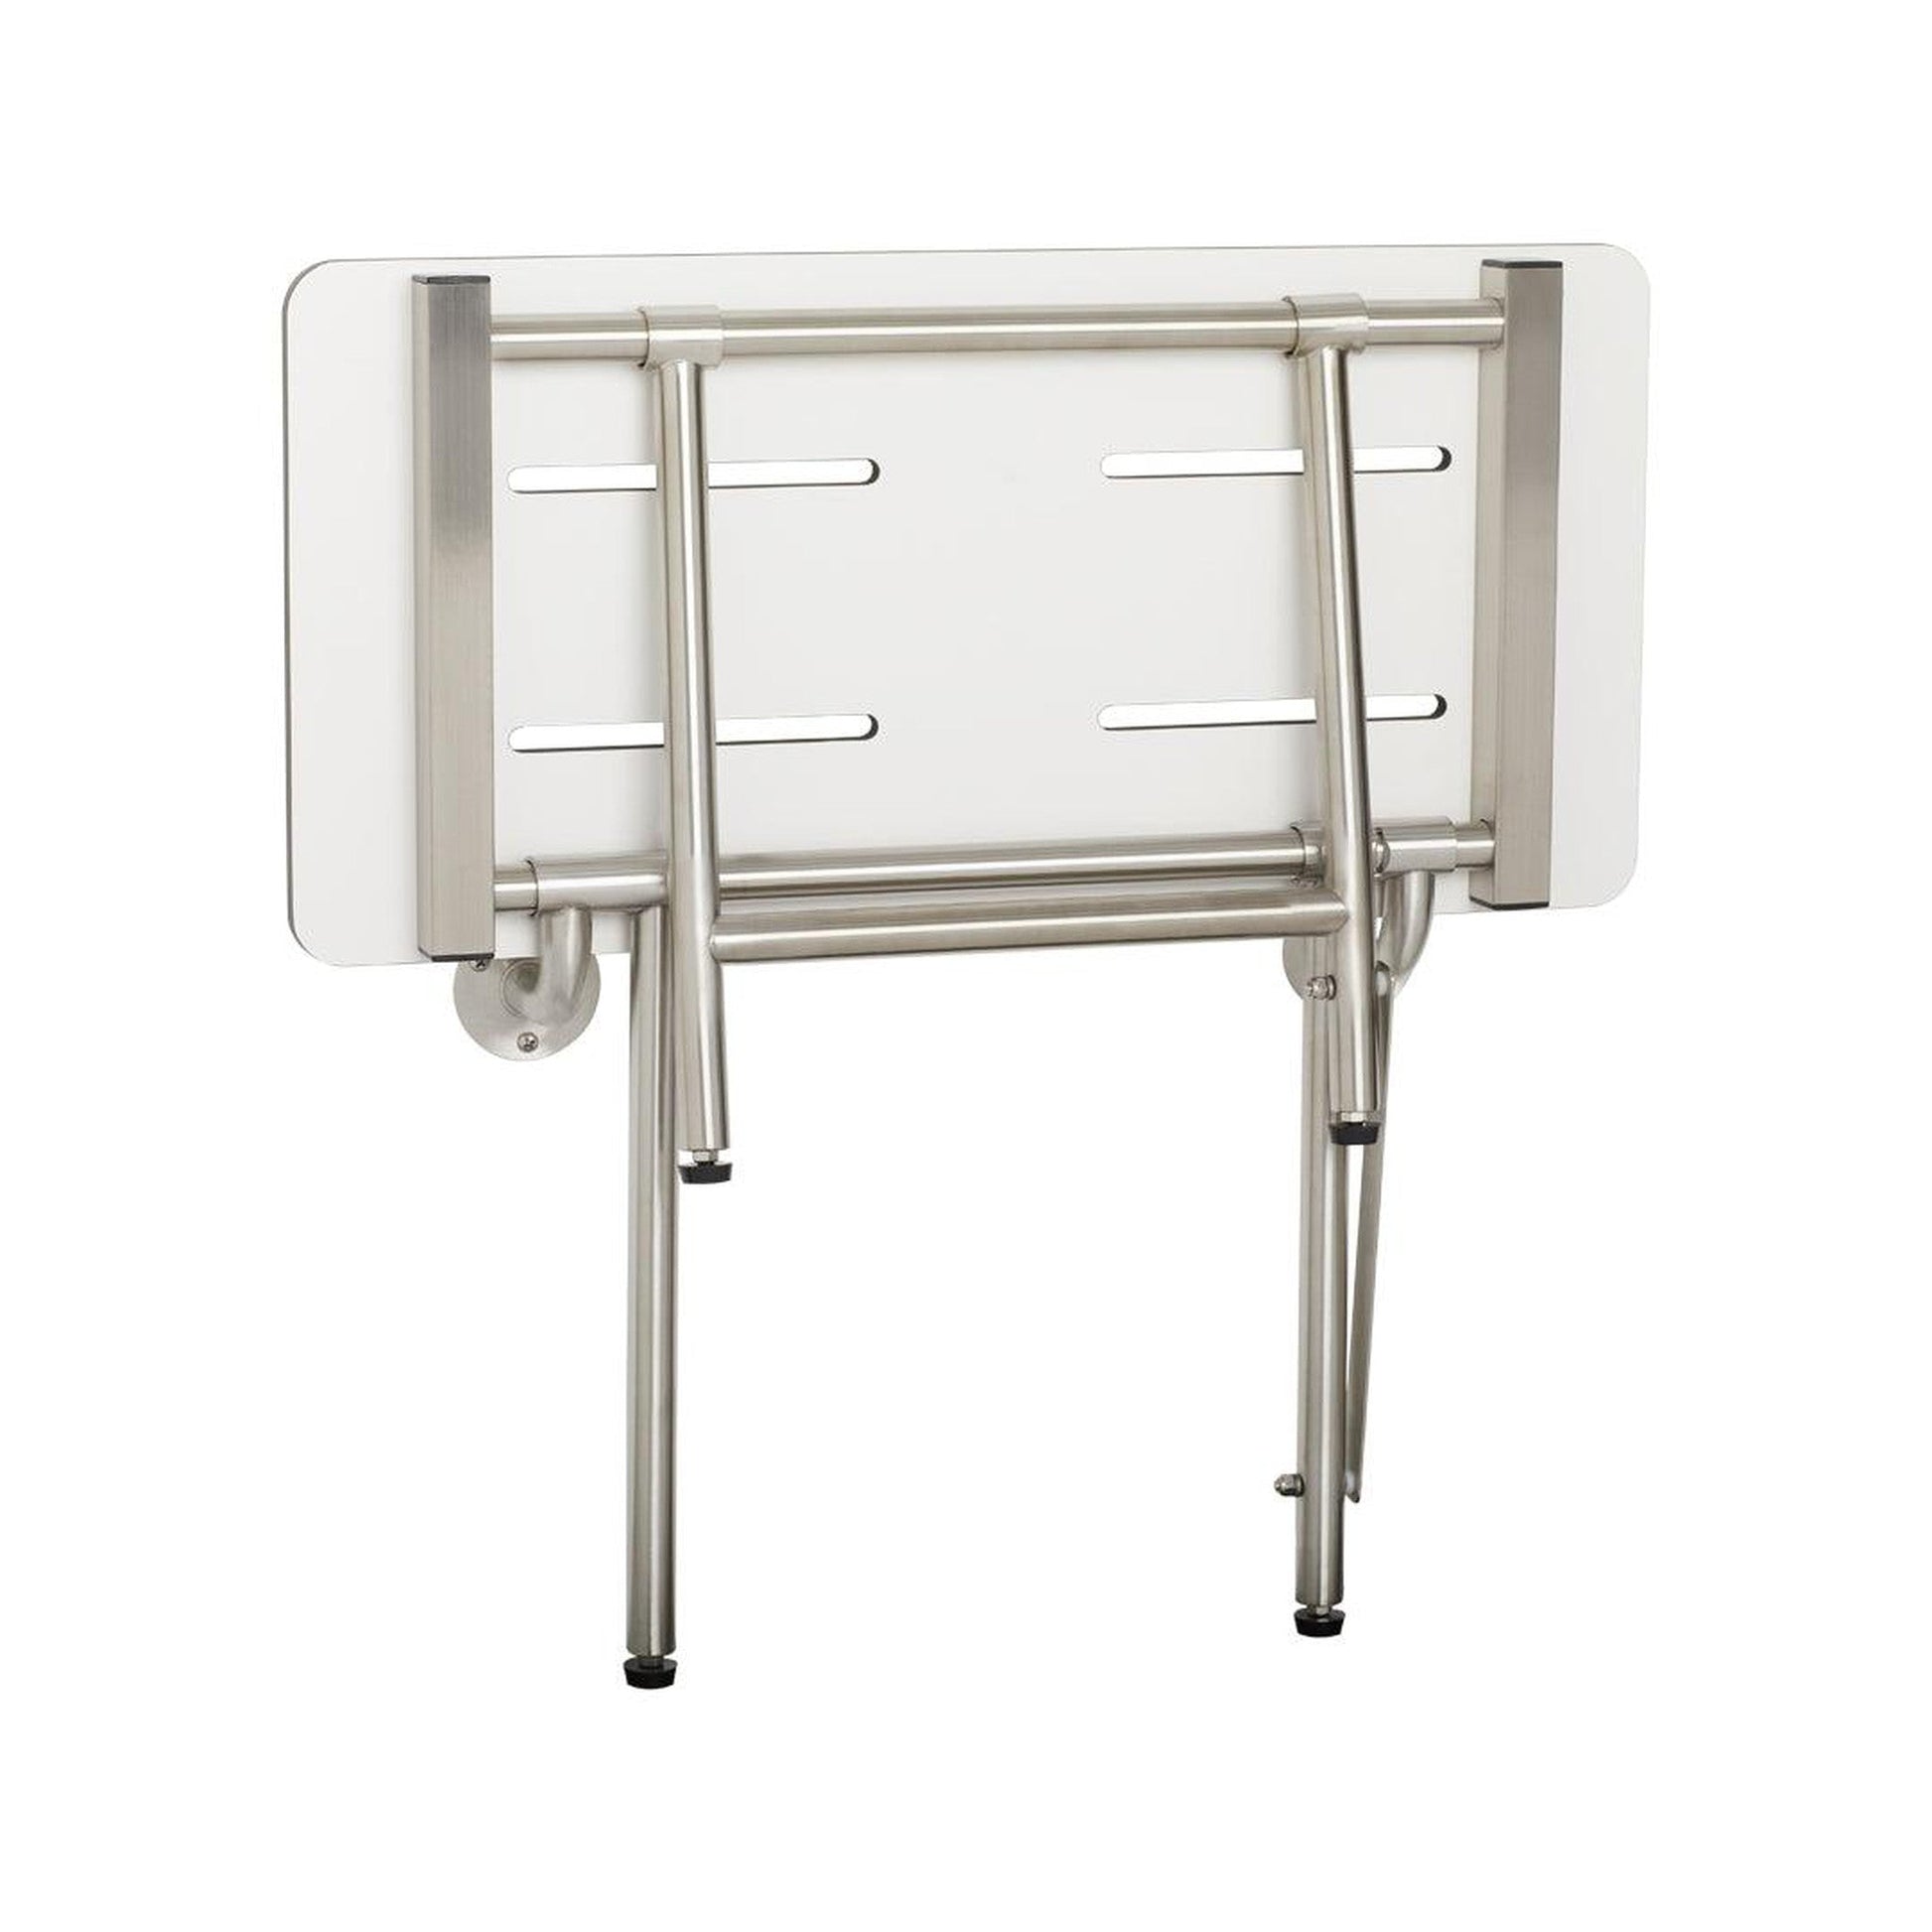 Seachrome Signature Series 18" W x 15" D White One-Piece Solid Phenolic Seat Top Bench Shower Seat With Swing-Down Legs